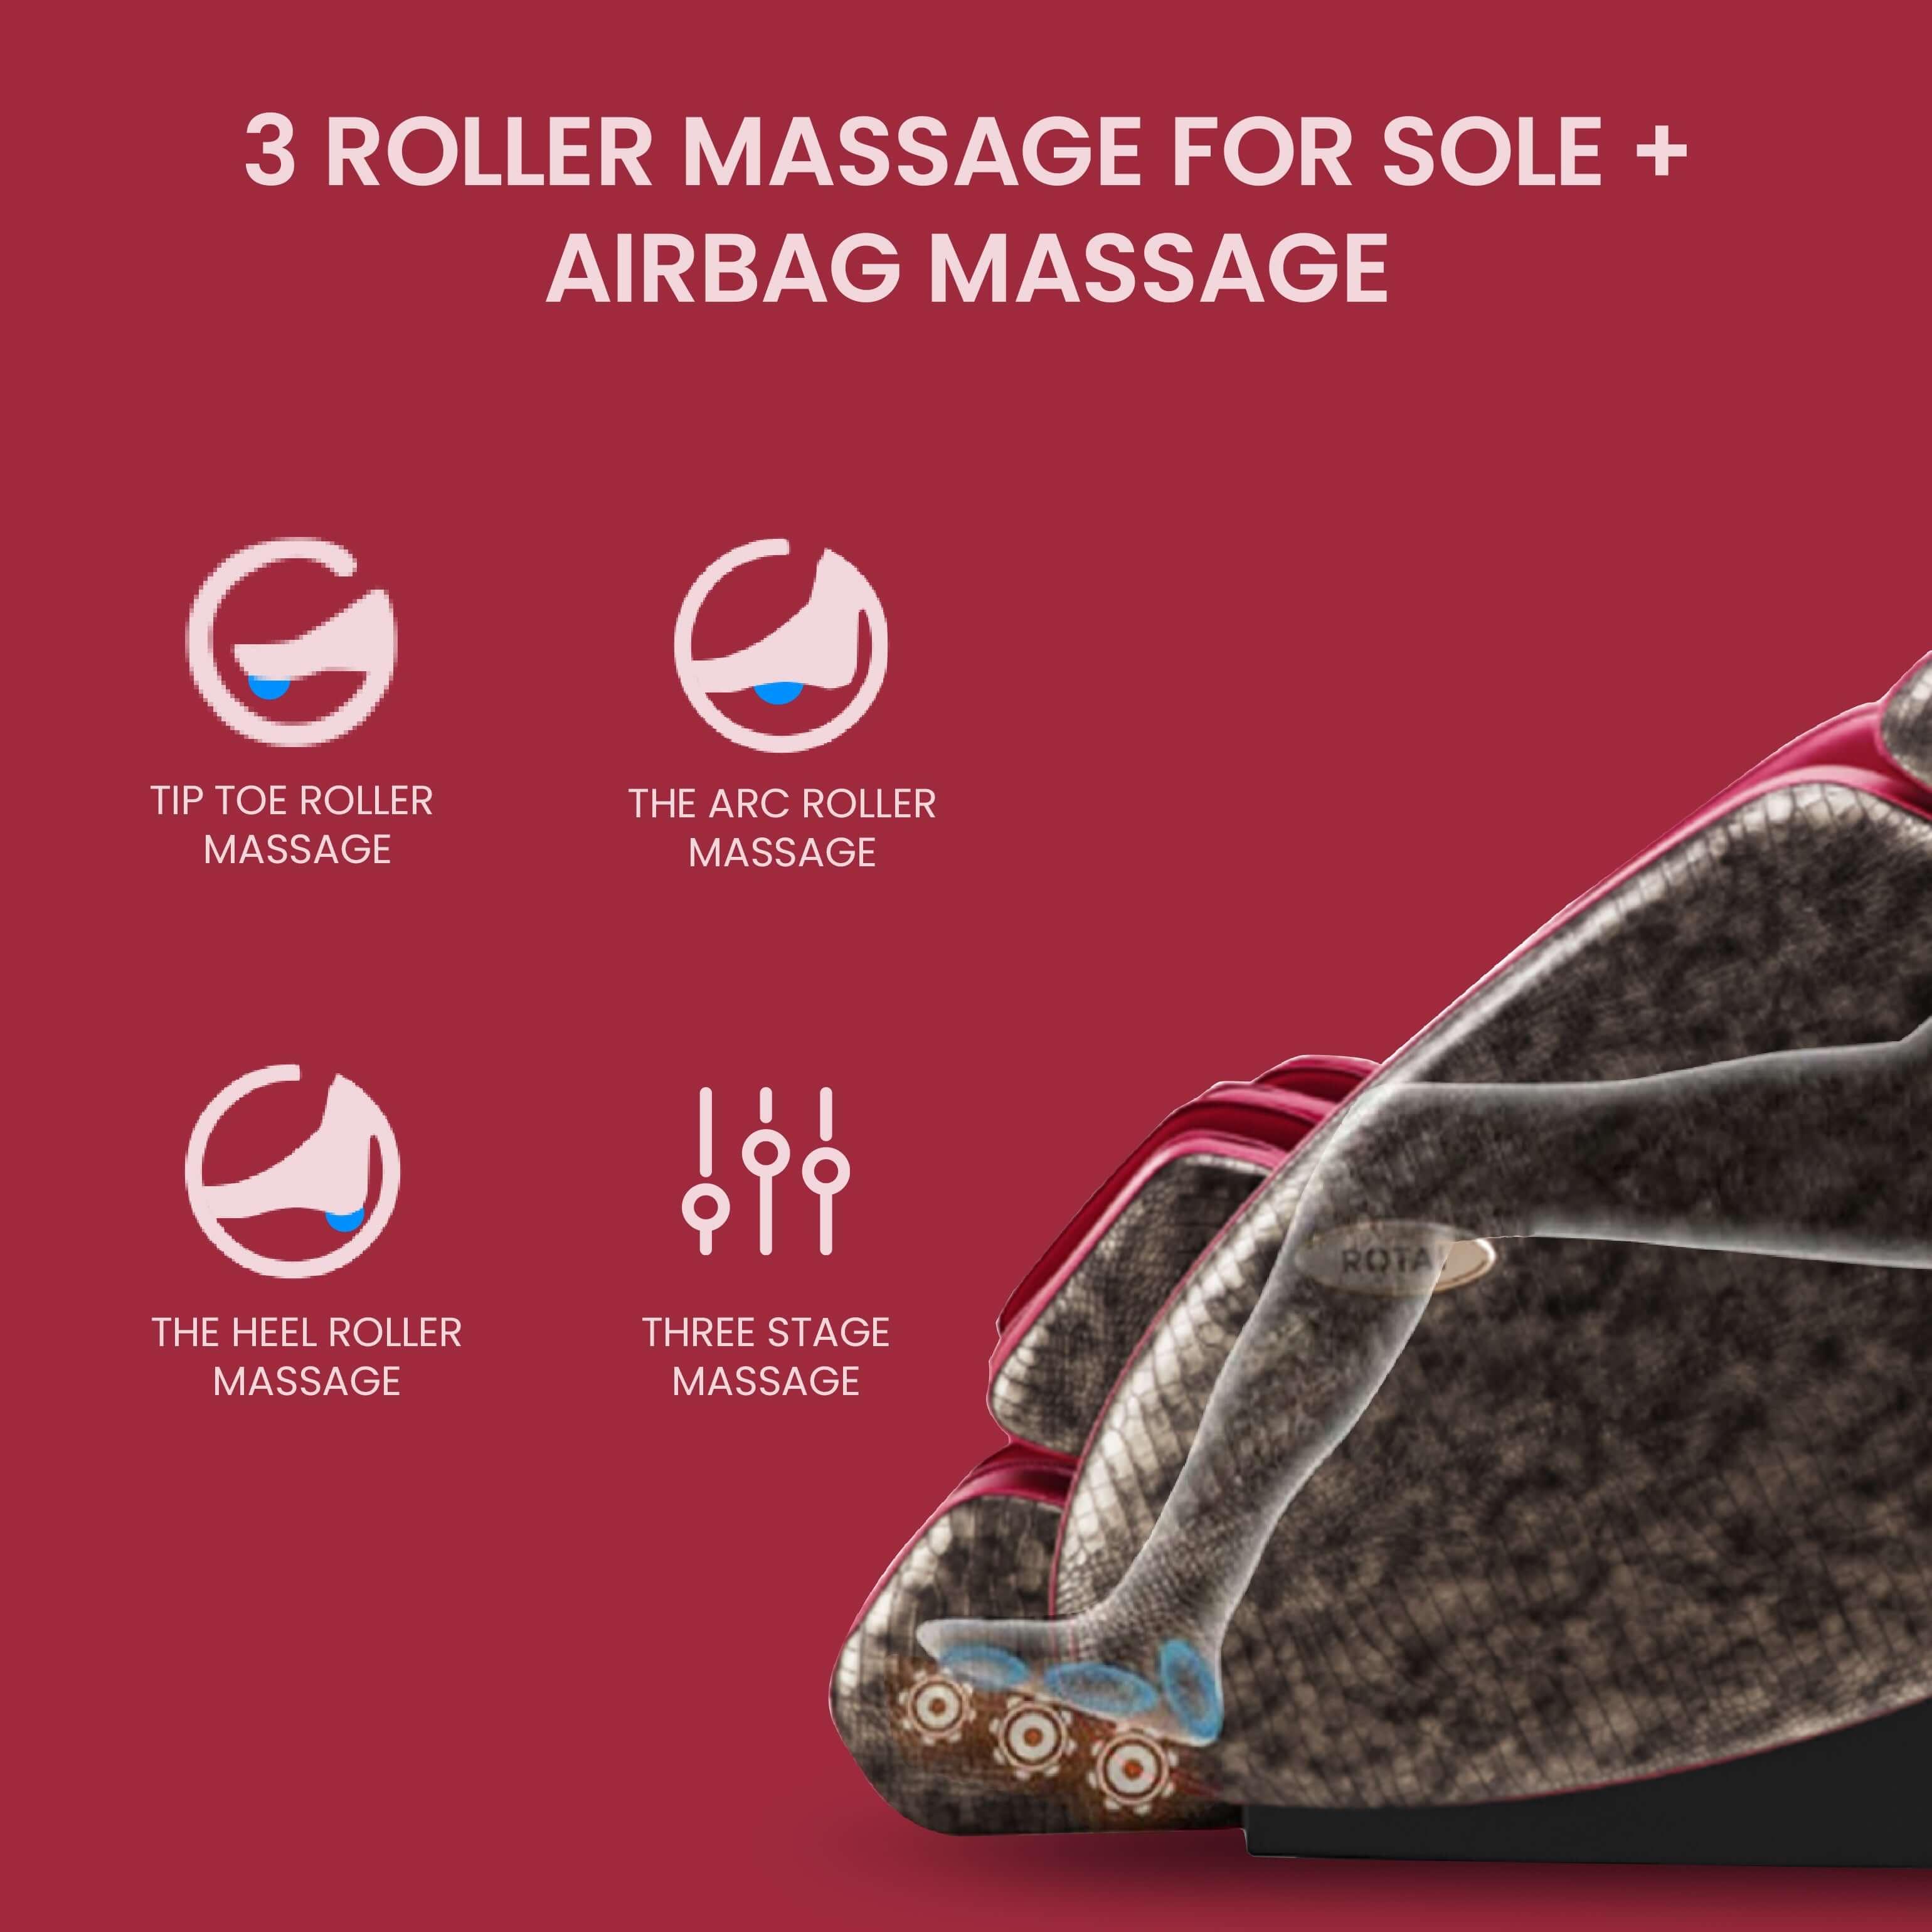 3 roller massage for sole and airbag massage feature of the best massage chair in UAE, providing tip toe, arc, heel roller, and three-stage massage\, best massage chair uae, massage chair Dubai, massage chair uae, massage chair Saudi Arabia, كرسي التدليك,